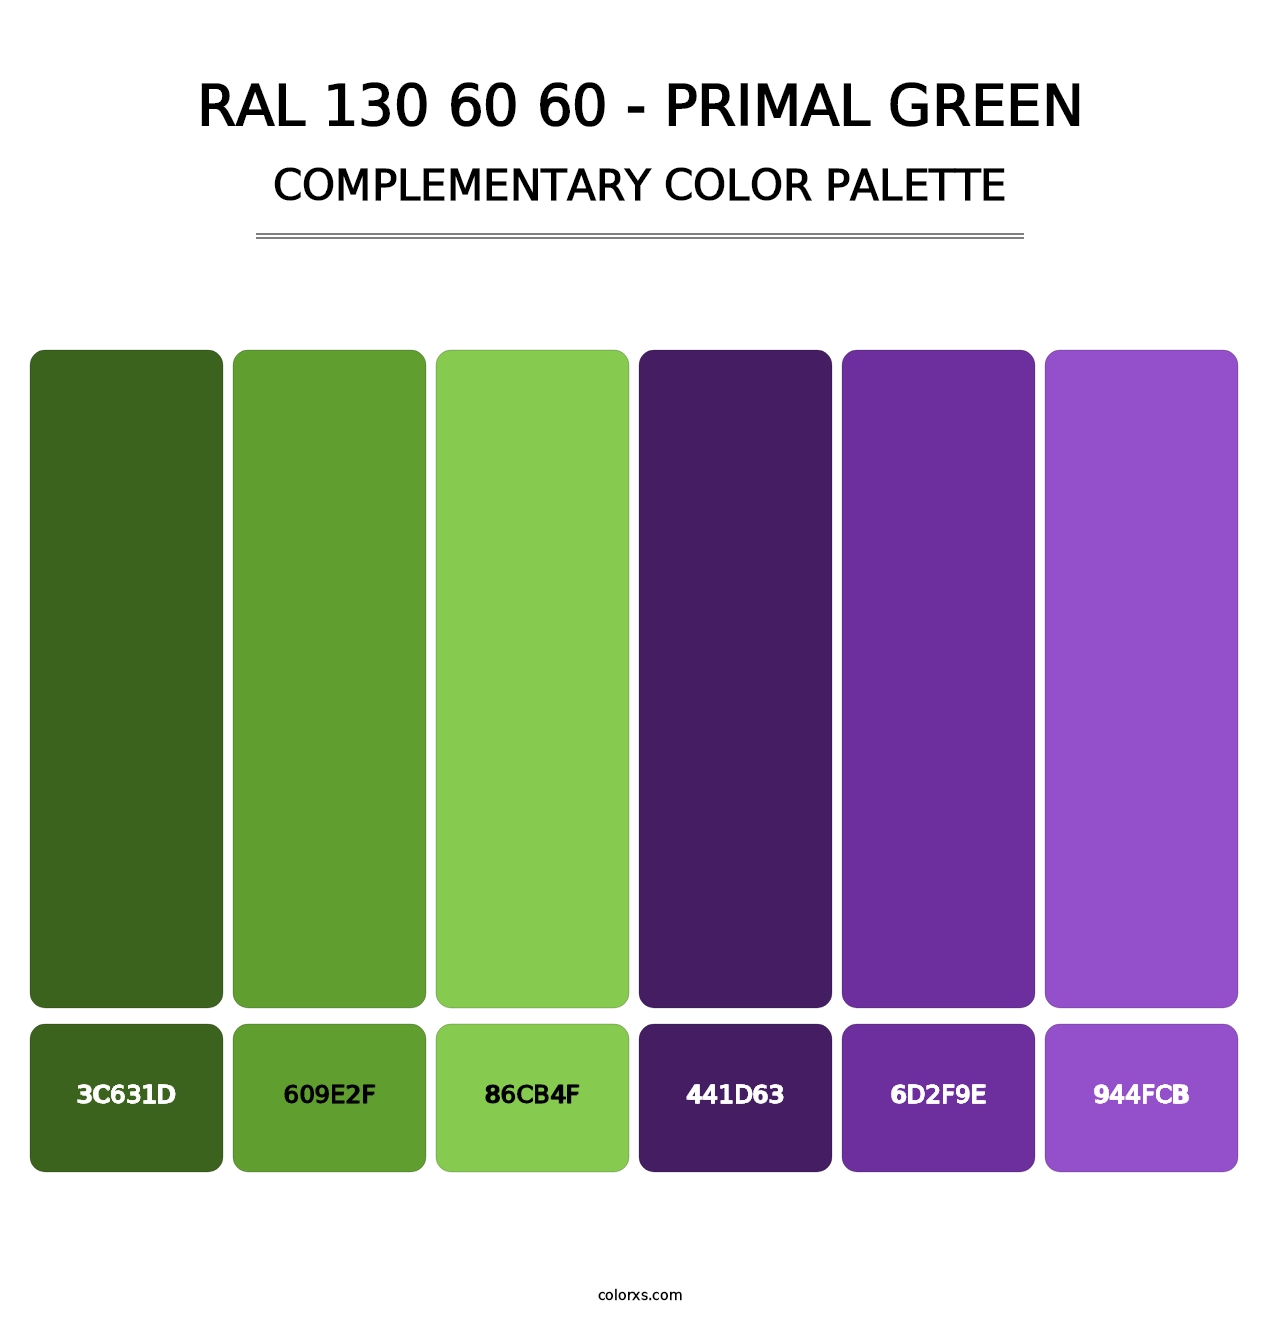 RAL 130 60 60 - Primal Green - Complementary Color Palette